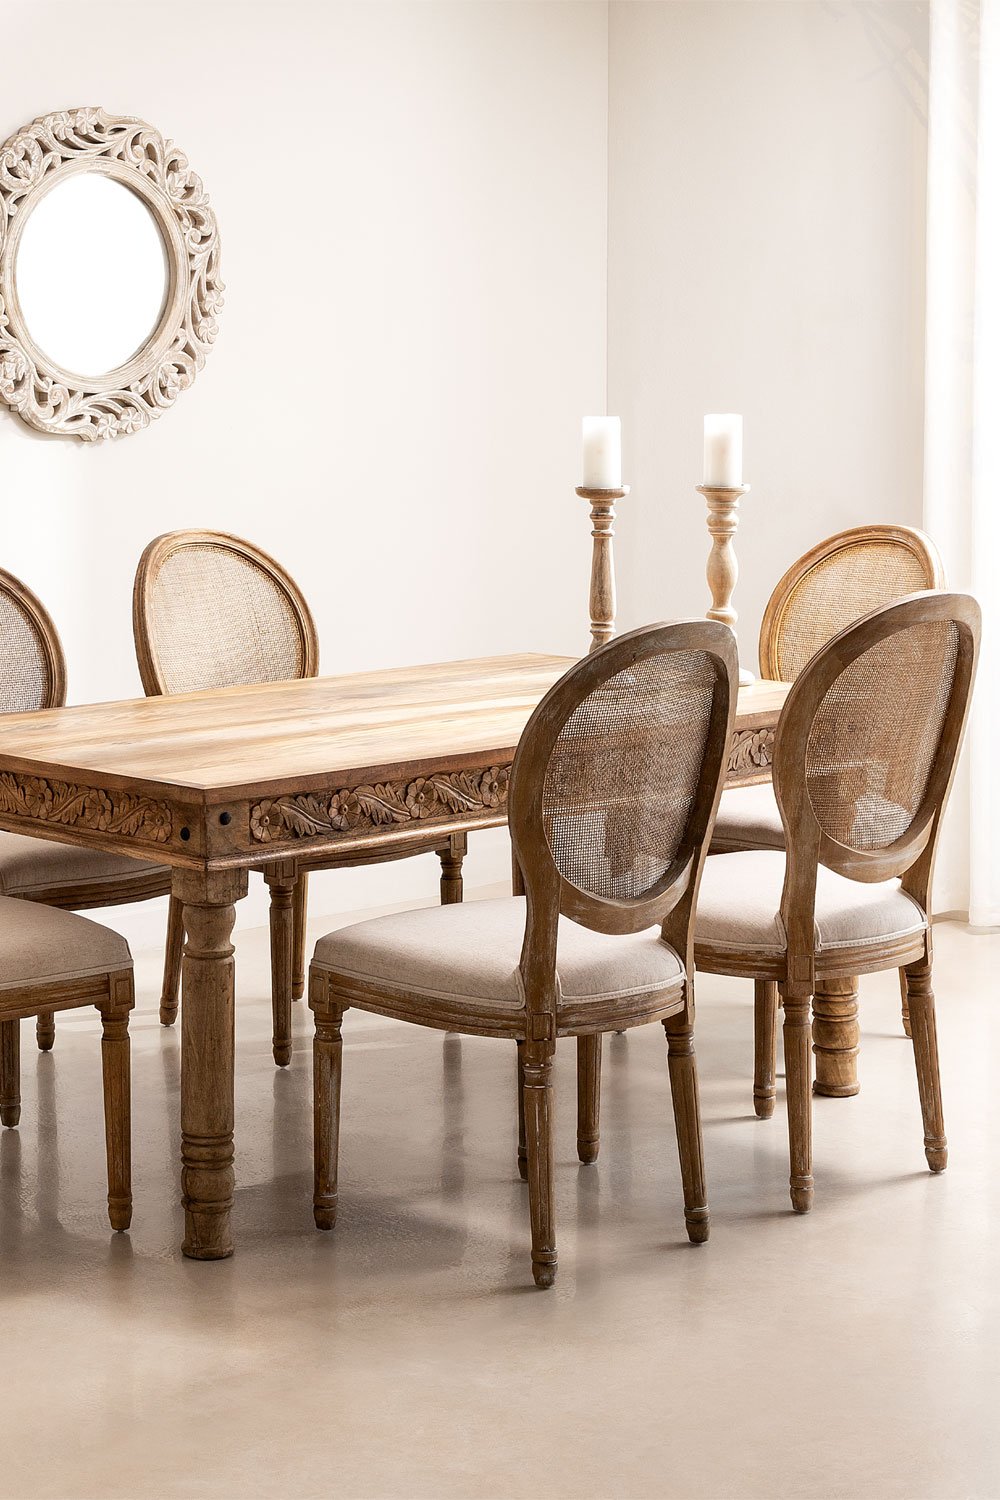 Rectangular Table Set in Mango Wood Taraz (160x90 cm) and 6 Dining Chairs in Fabric Sunna, gallery image 1